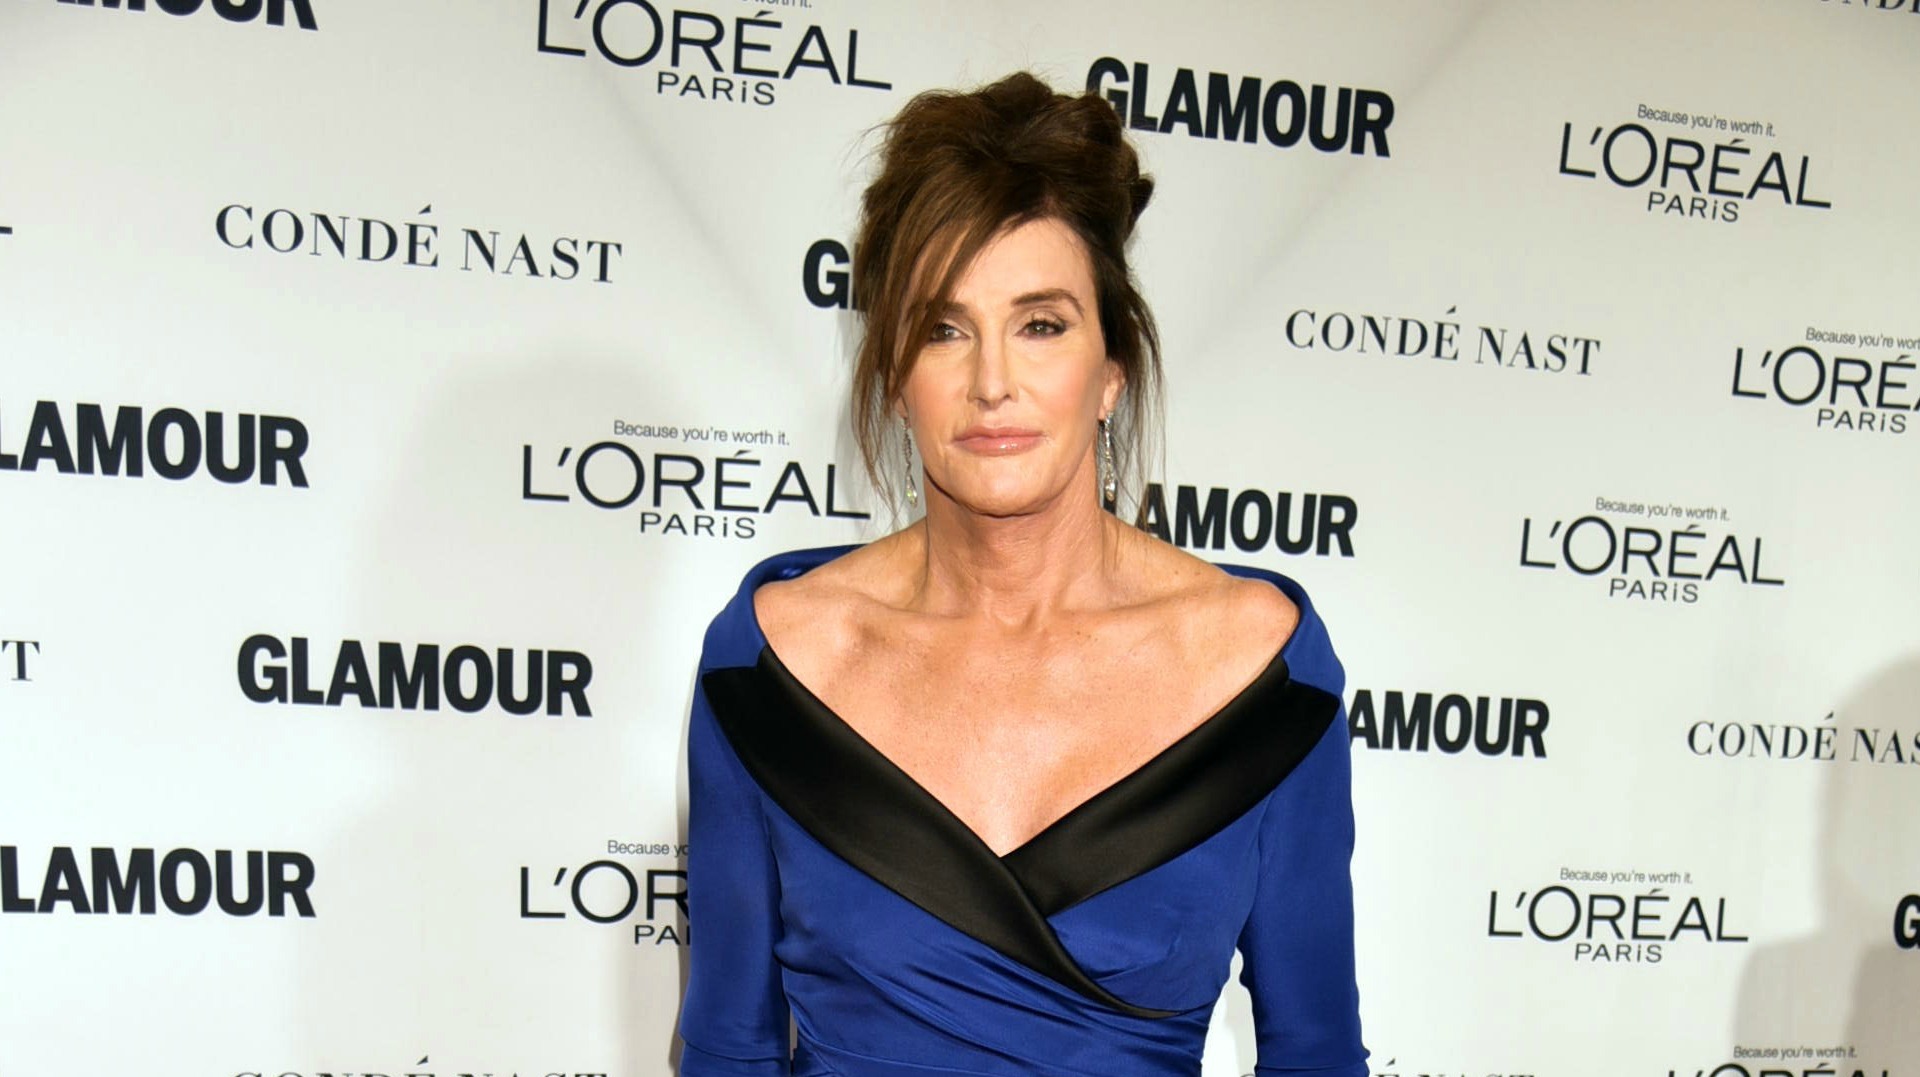 2015 Glamour Women Of The Year Awards at Carnegie Hall - Red Carpet Arrivals Featuring: Caitlyn Jenner Where: New York City, New York, United States When: 09 Nov 2015 Credit: Rob Rich/WENN.com